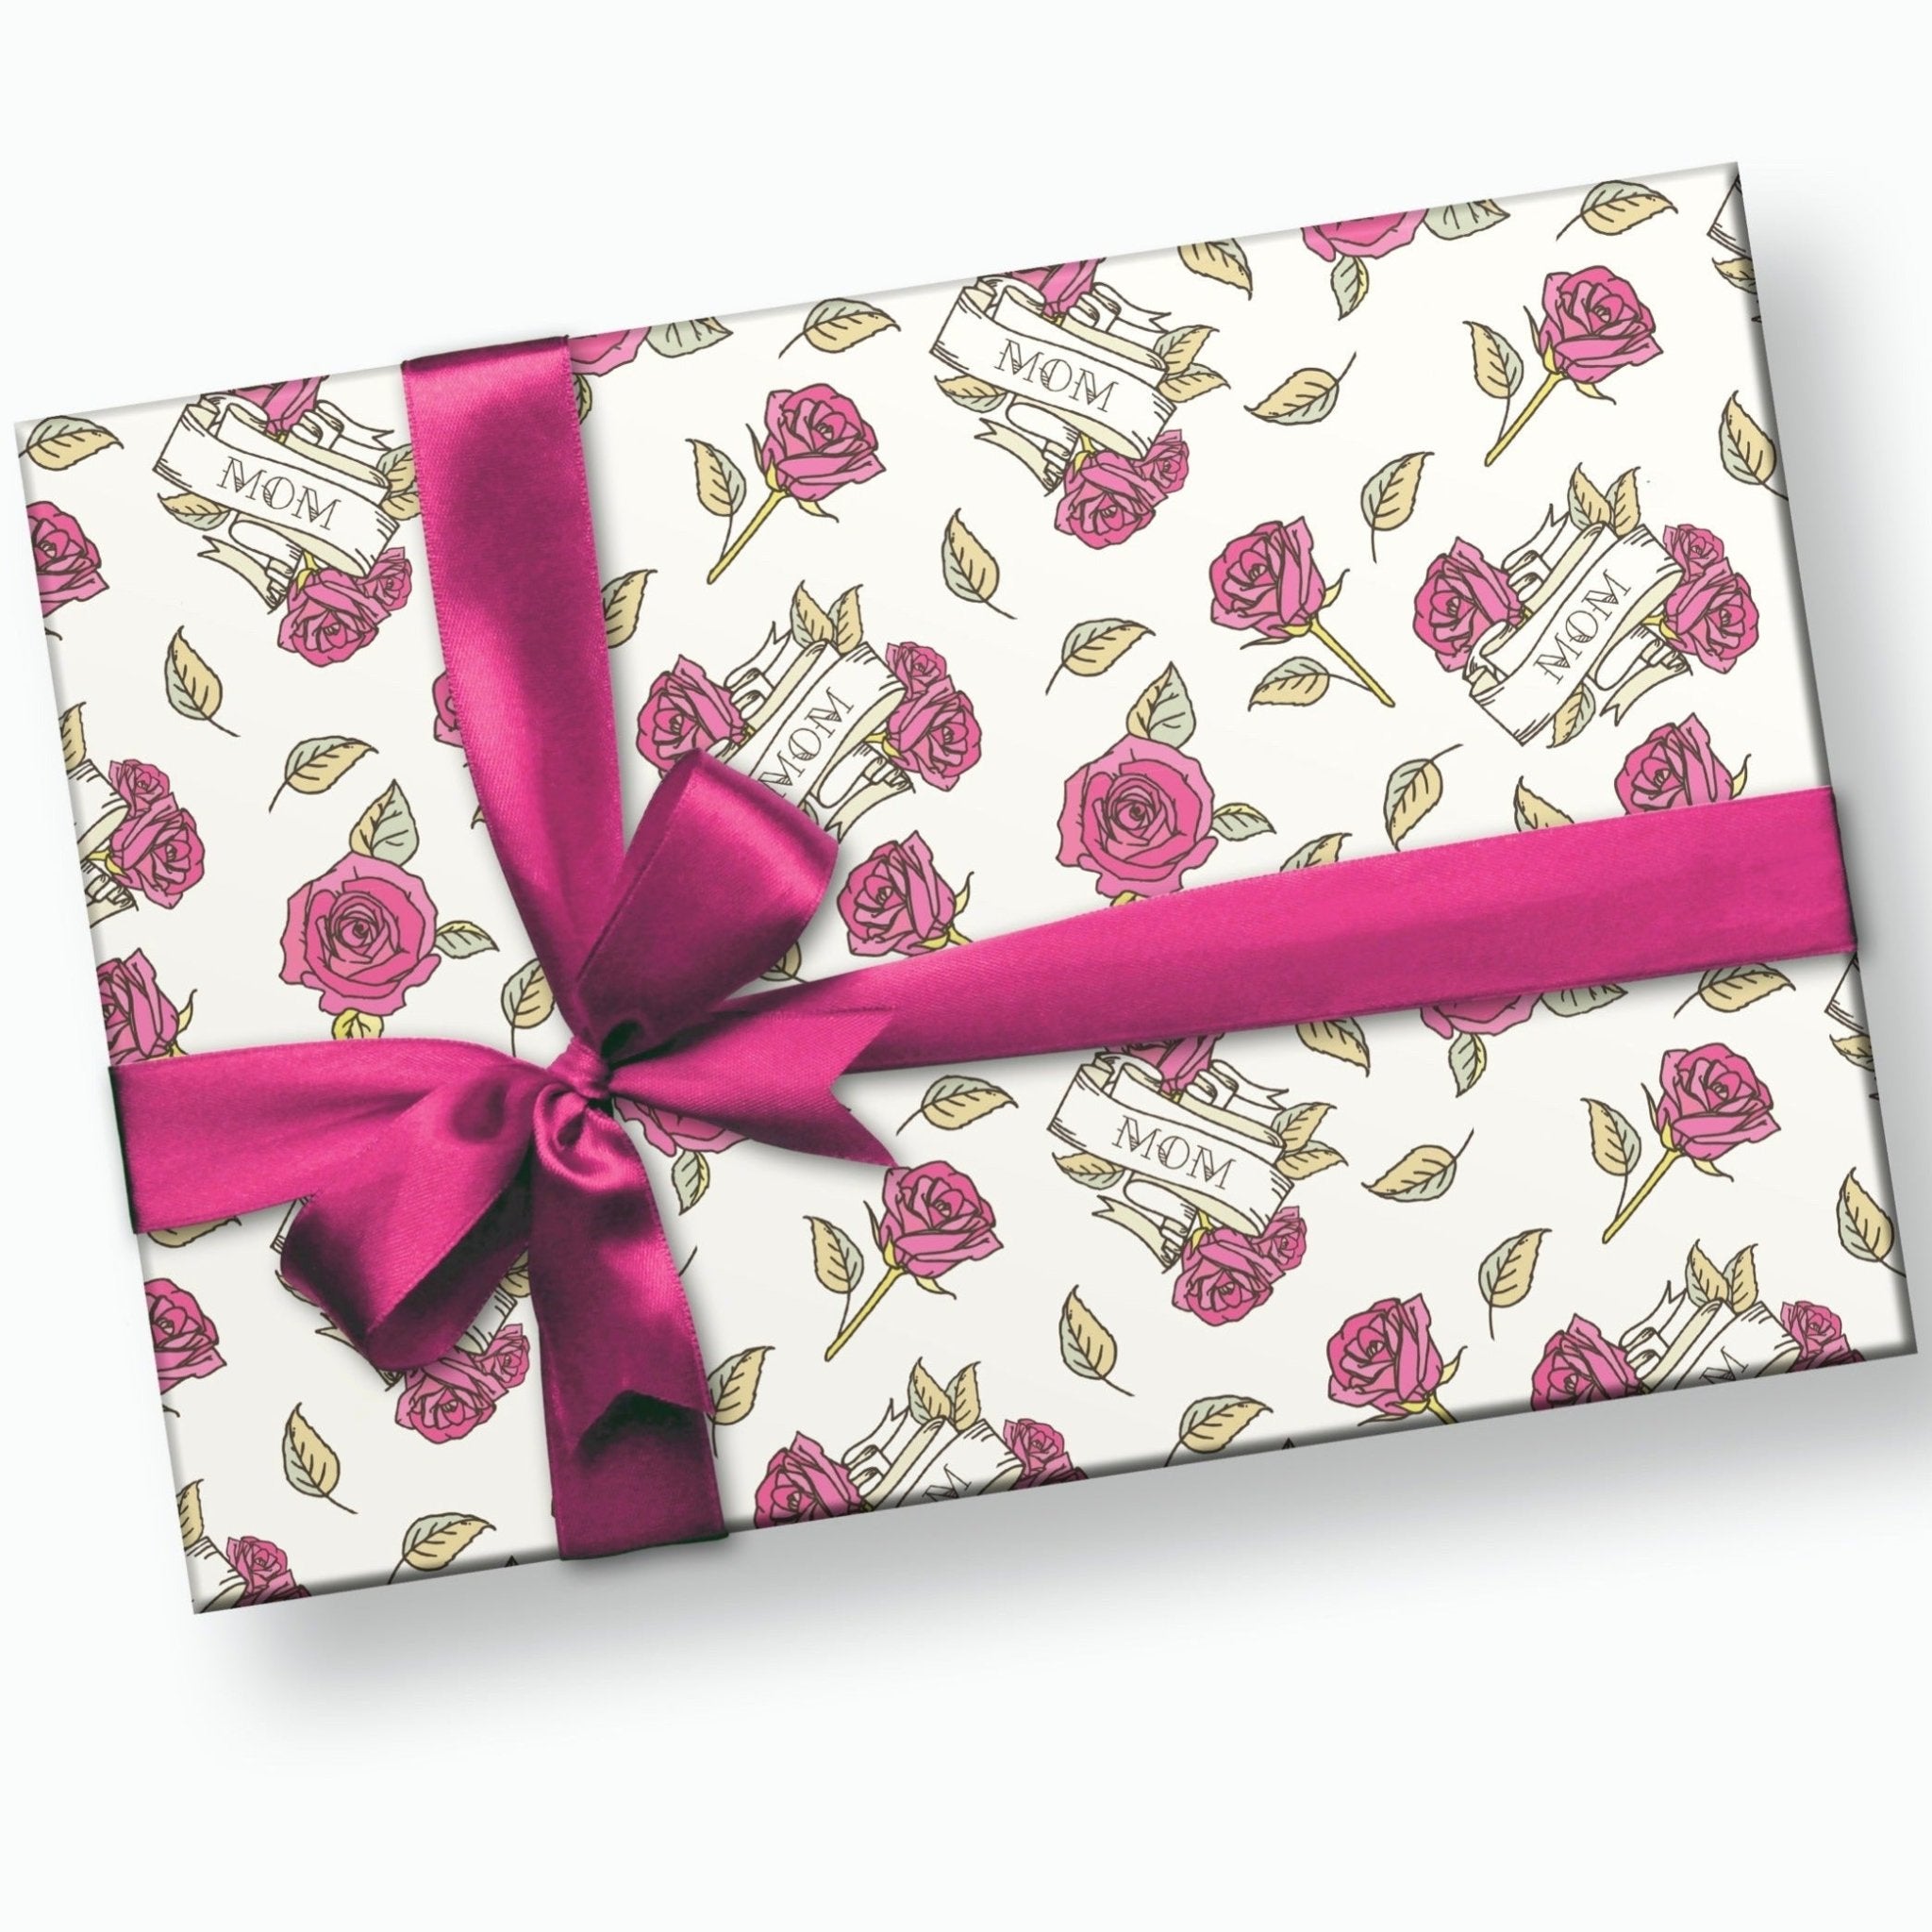 Boho Bearly Wait Bear Family Baby Shower Wrapping Paper Sheets